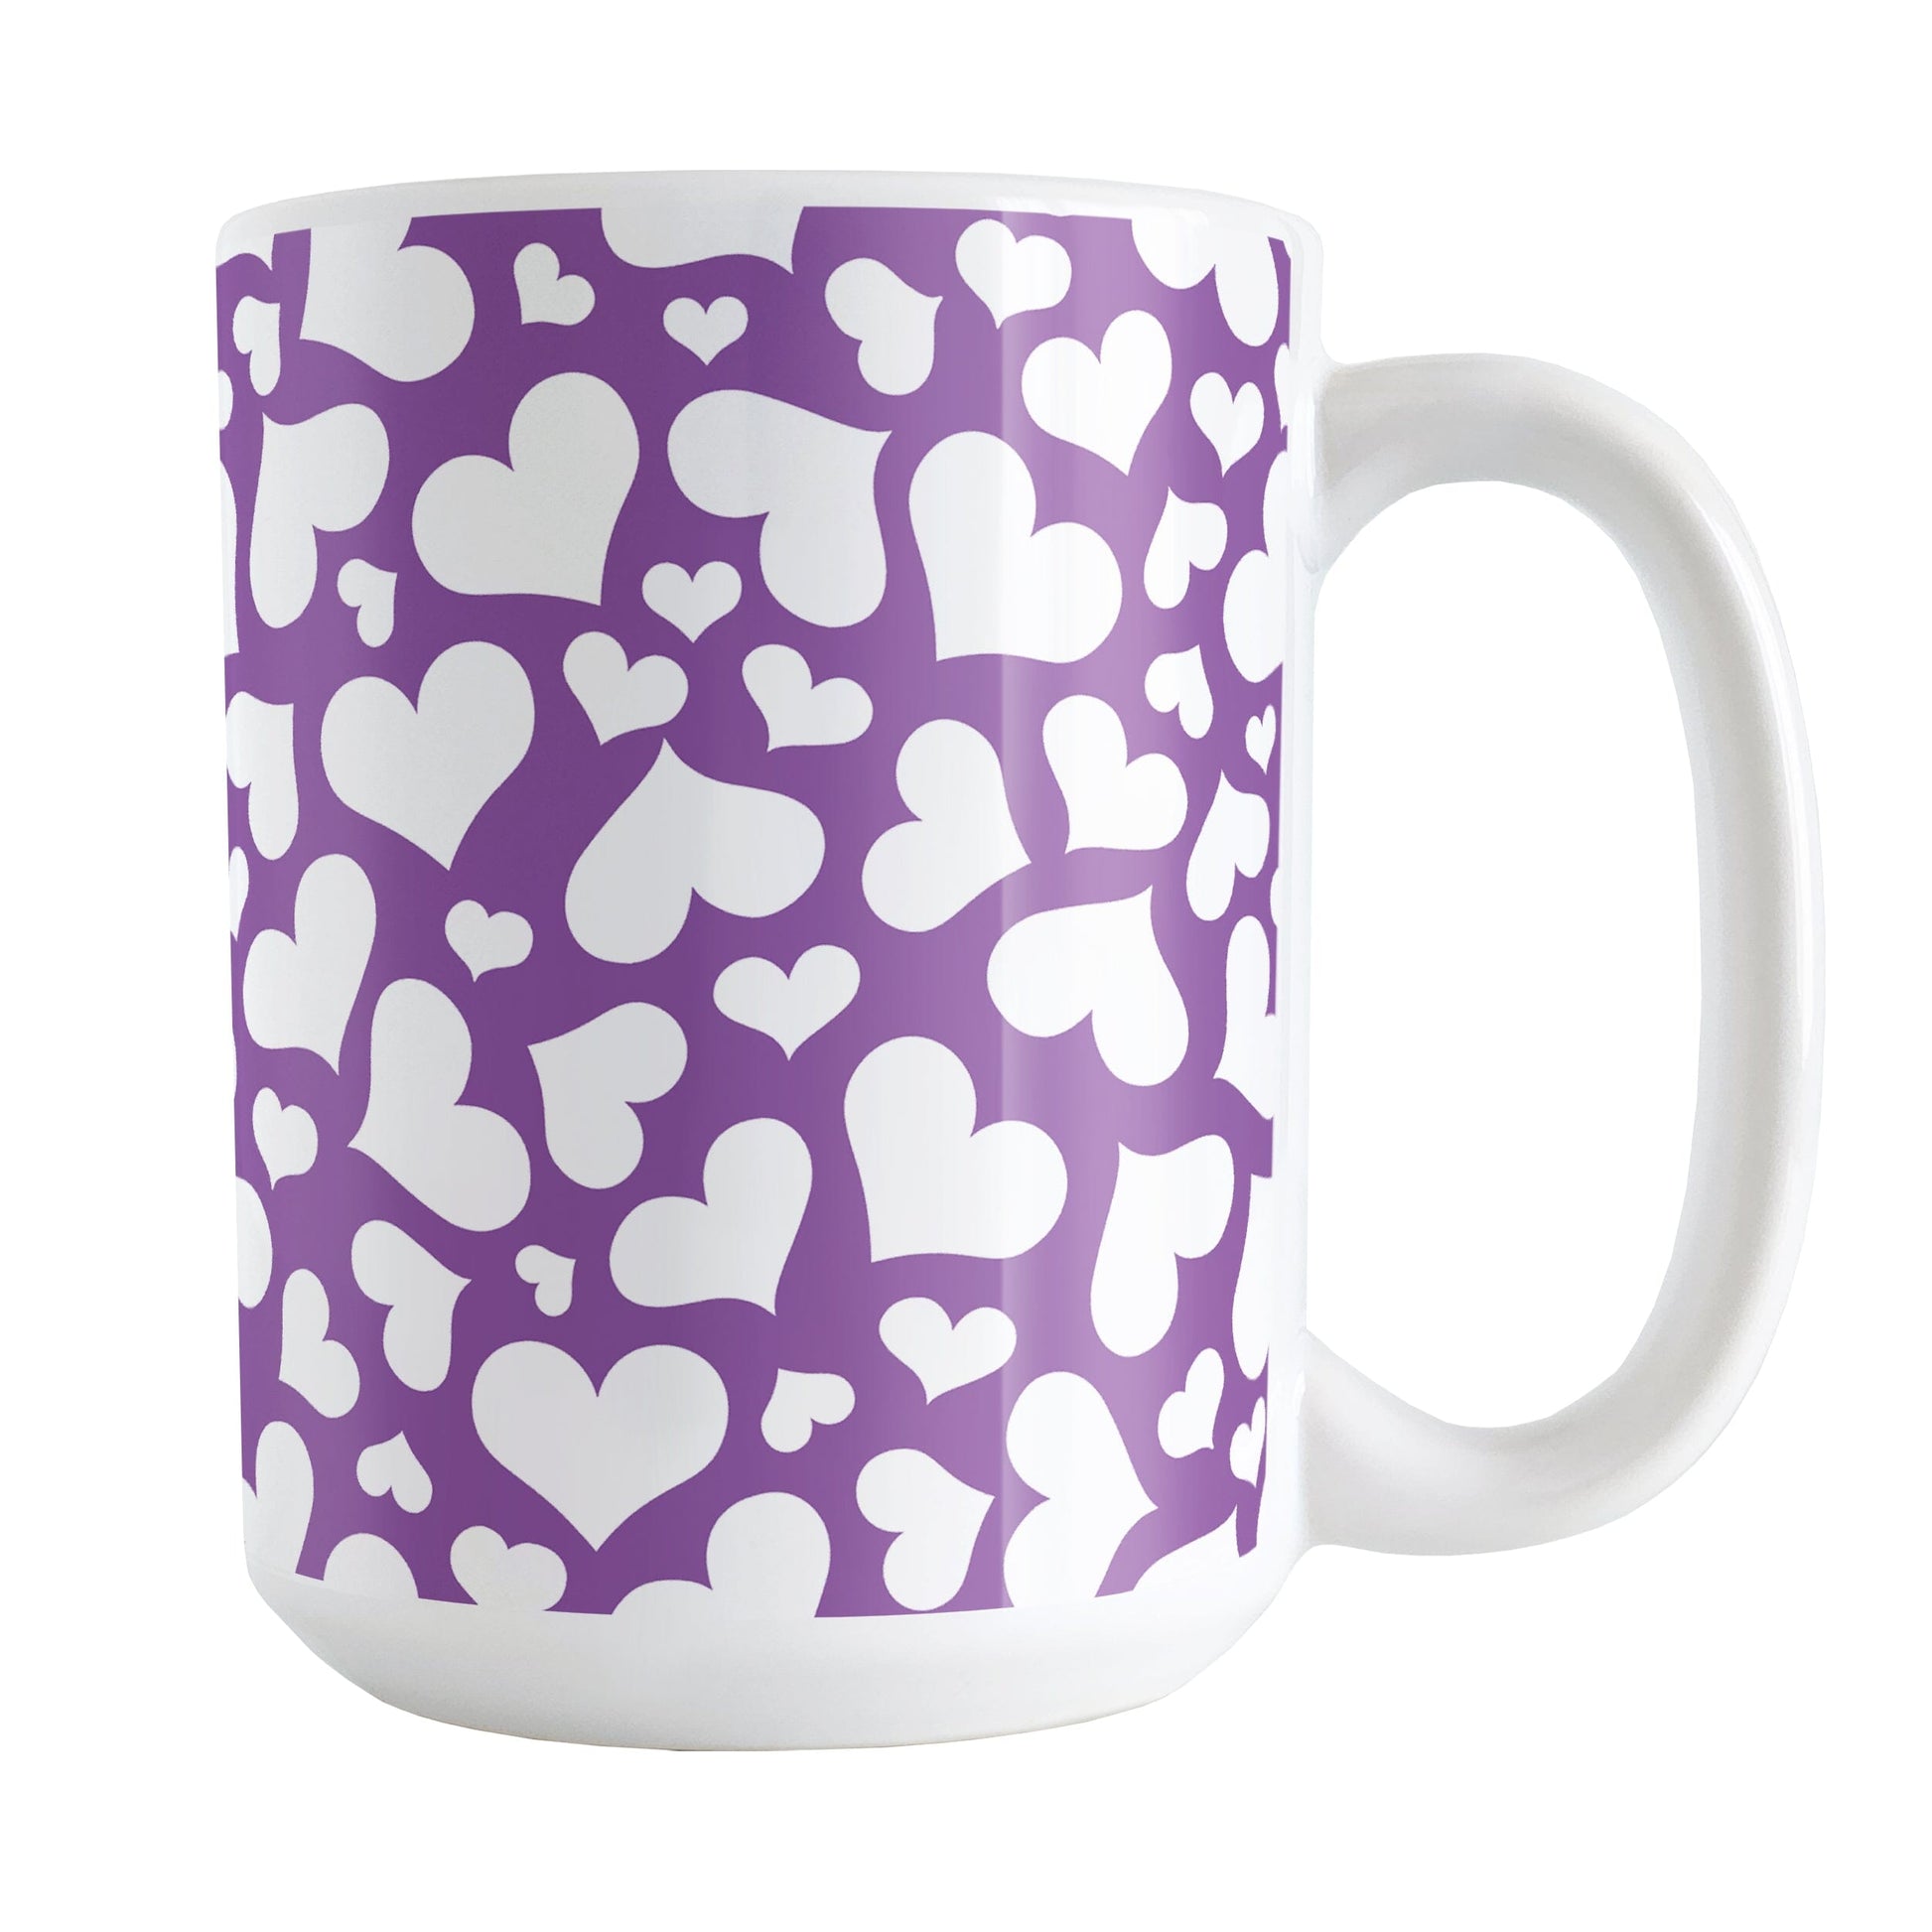 Cute White Hearts on Purple Mug (15oz) at Amy's Coffee Mugs. A ceramic coffee mug designed with a multi-directional pattern of cute white hearts over a purple background color that wraps around the mug to the handle.